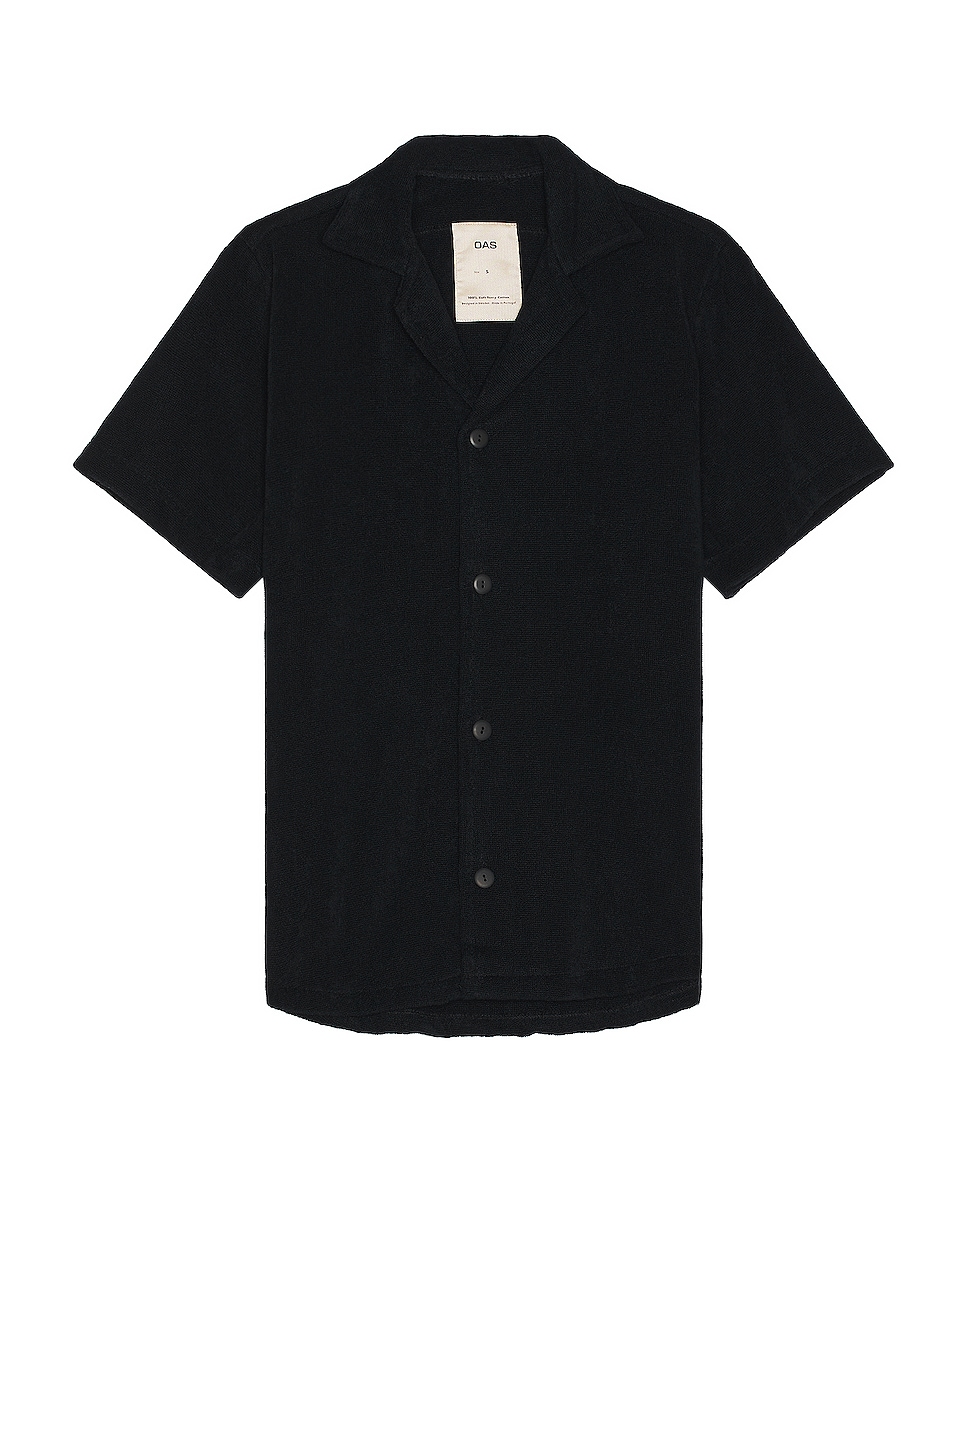 Image 1 of OAS Cuba Terry Shirt in Black